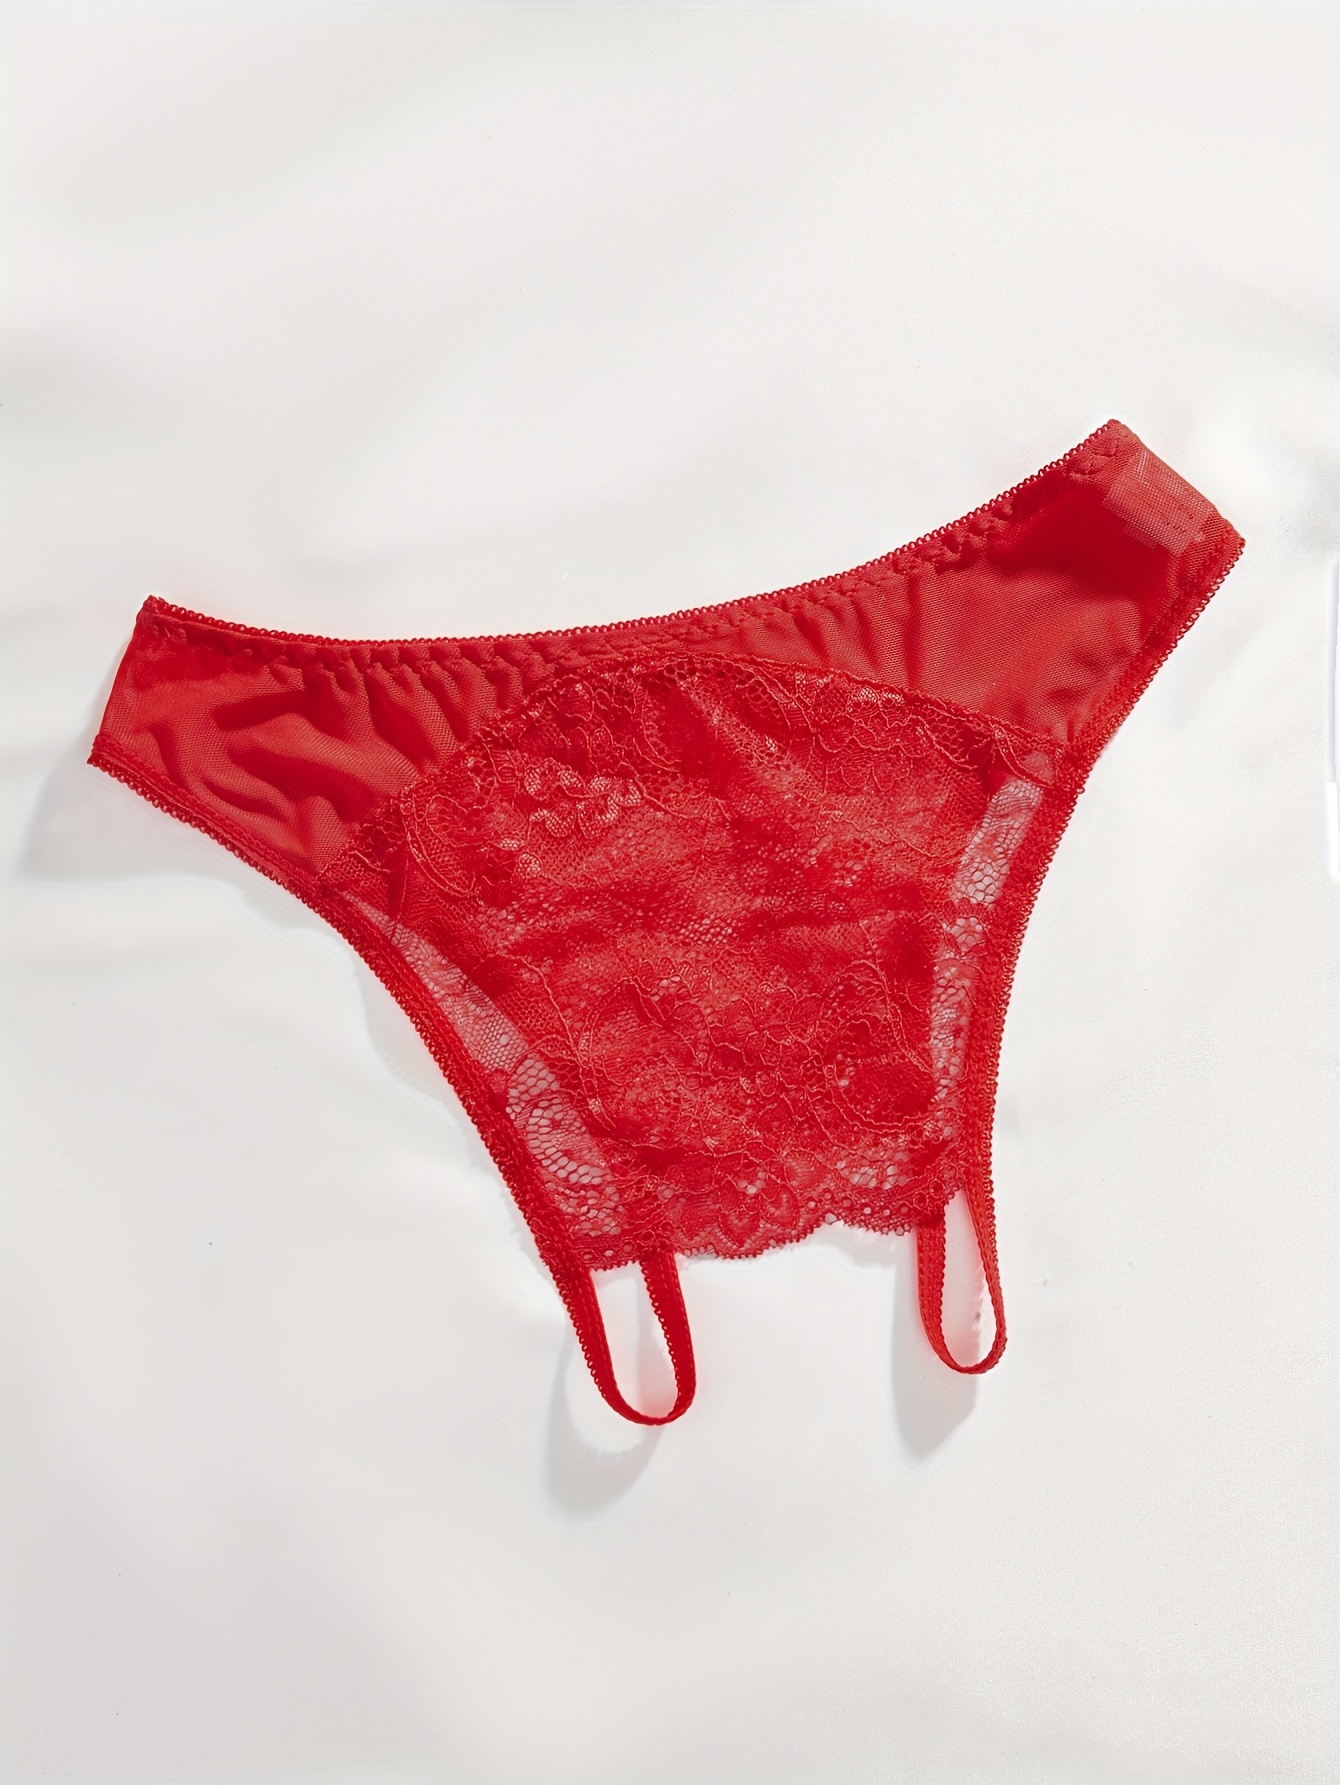 Red Bow Underwear Red Chain Red Mesh Dress Open Knickers Crop T